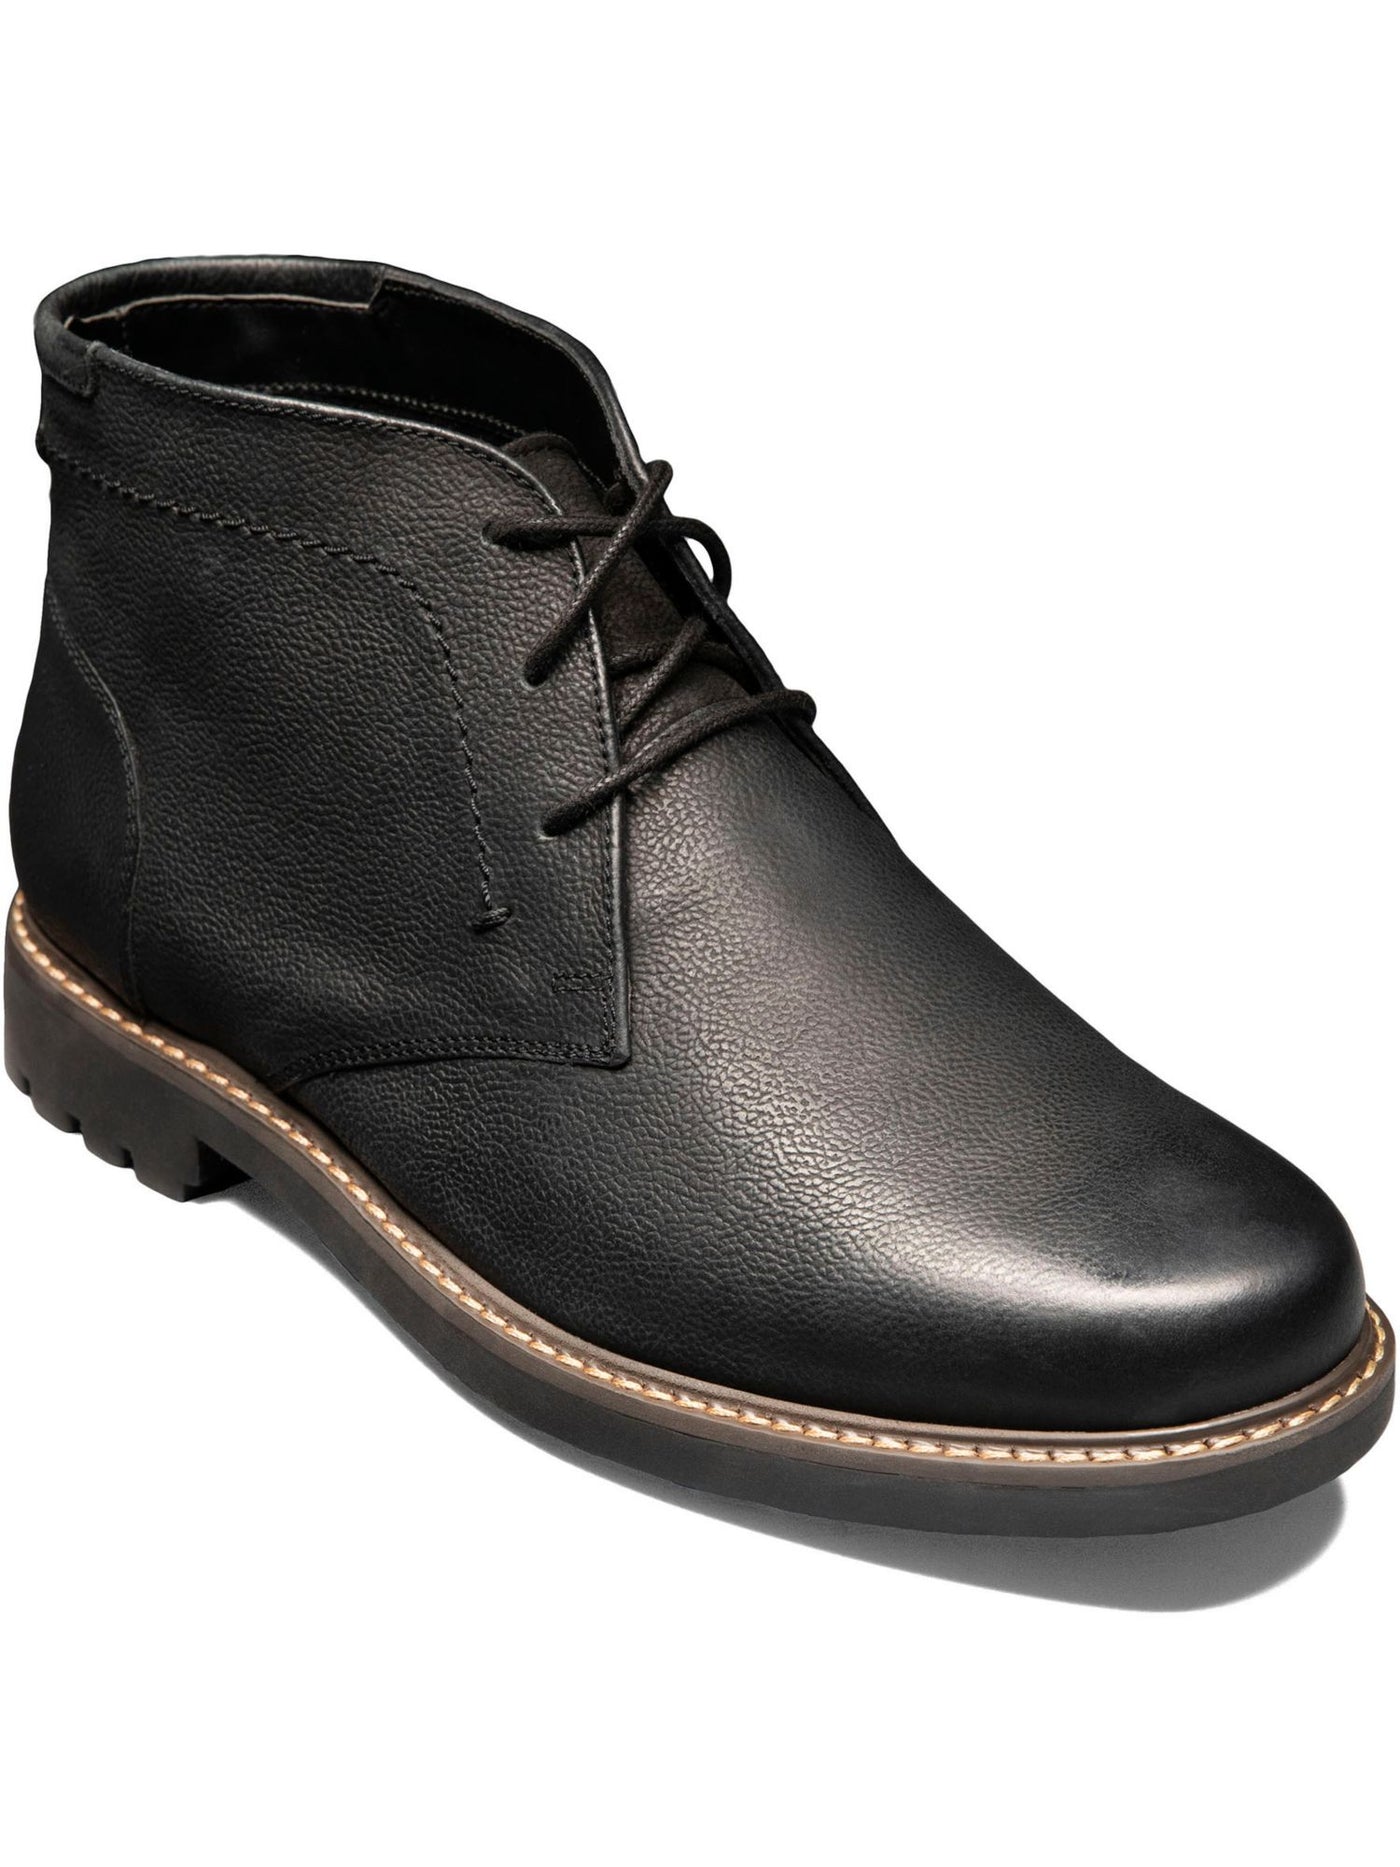 FLORSHEIM Mens Black Lug Sole Removable Insole Field Round Toe Block Heel Lace-Up Leather Chukka Boots 8 M